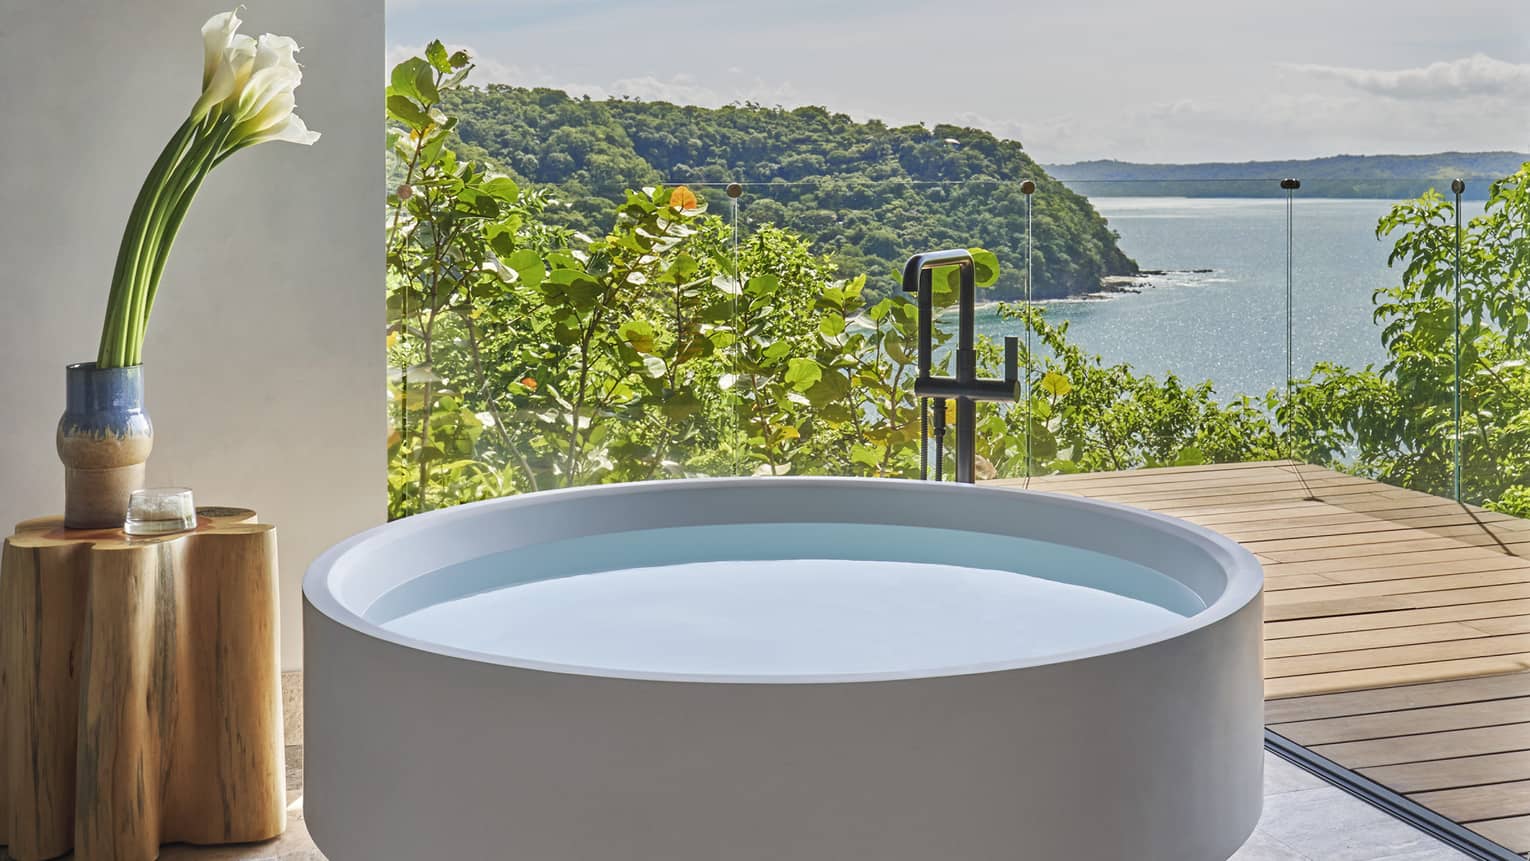 A stand-alone, circular tub on a private terrace overlooking the sea